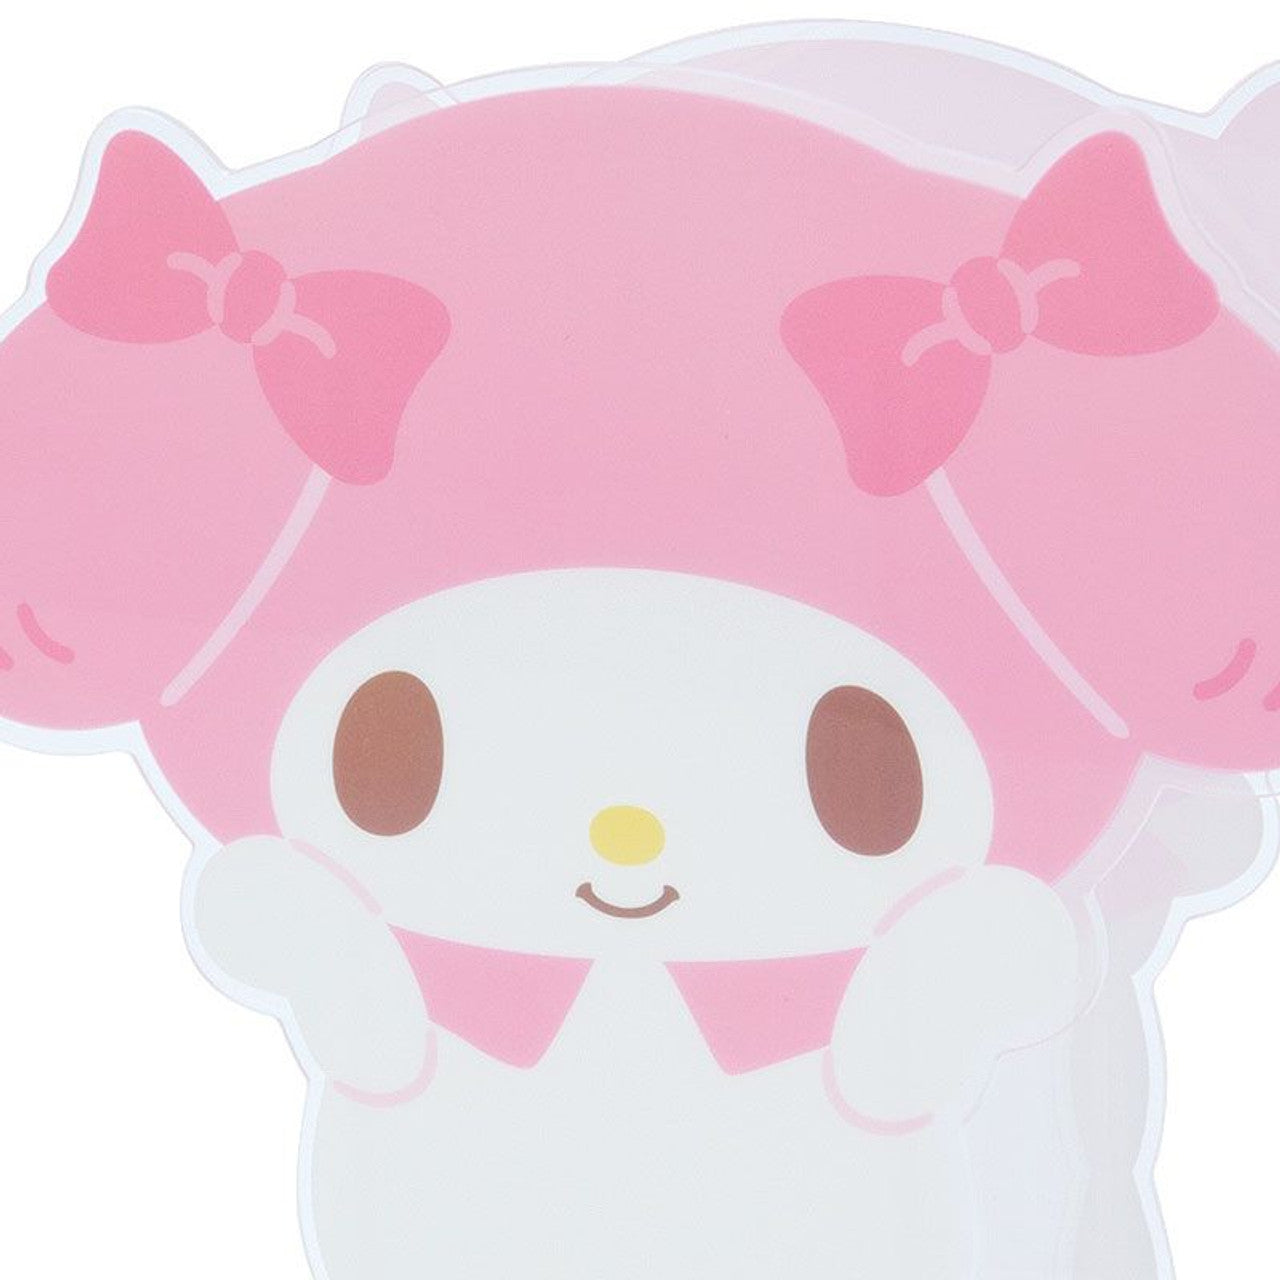 Sanrio Characters Die-Cut Acrylic Pen Stand Pencil Holder (My Melody - 835102)